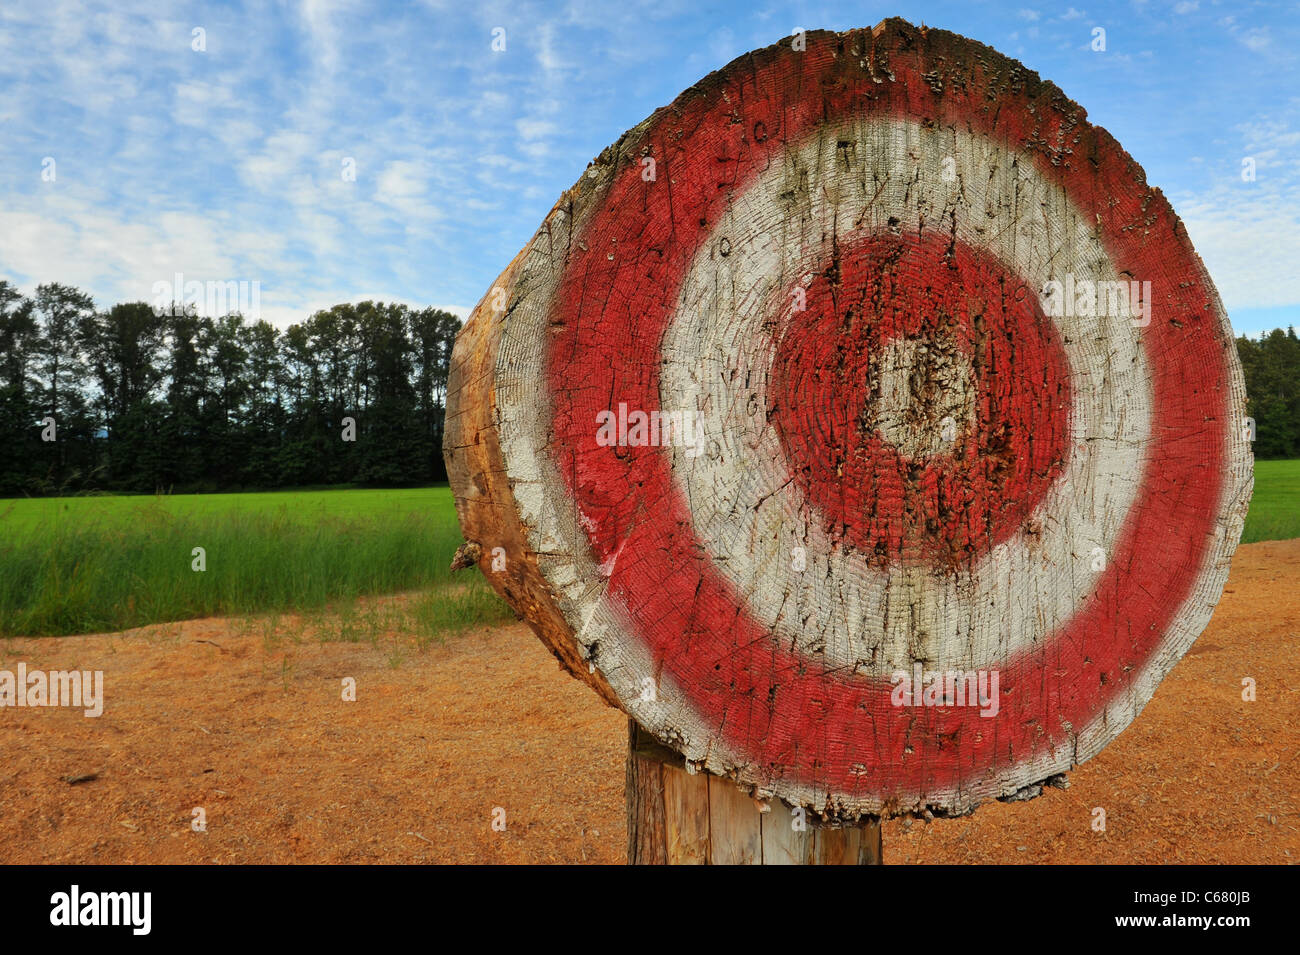 Red and white painted, wooden archery target on a summer day at River Meadows County Park near Arlington, Washington. Stock Photo